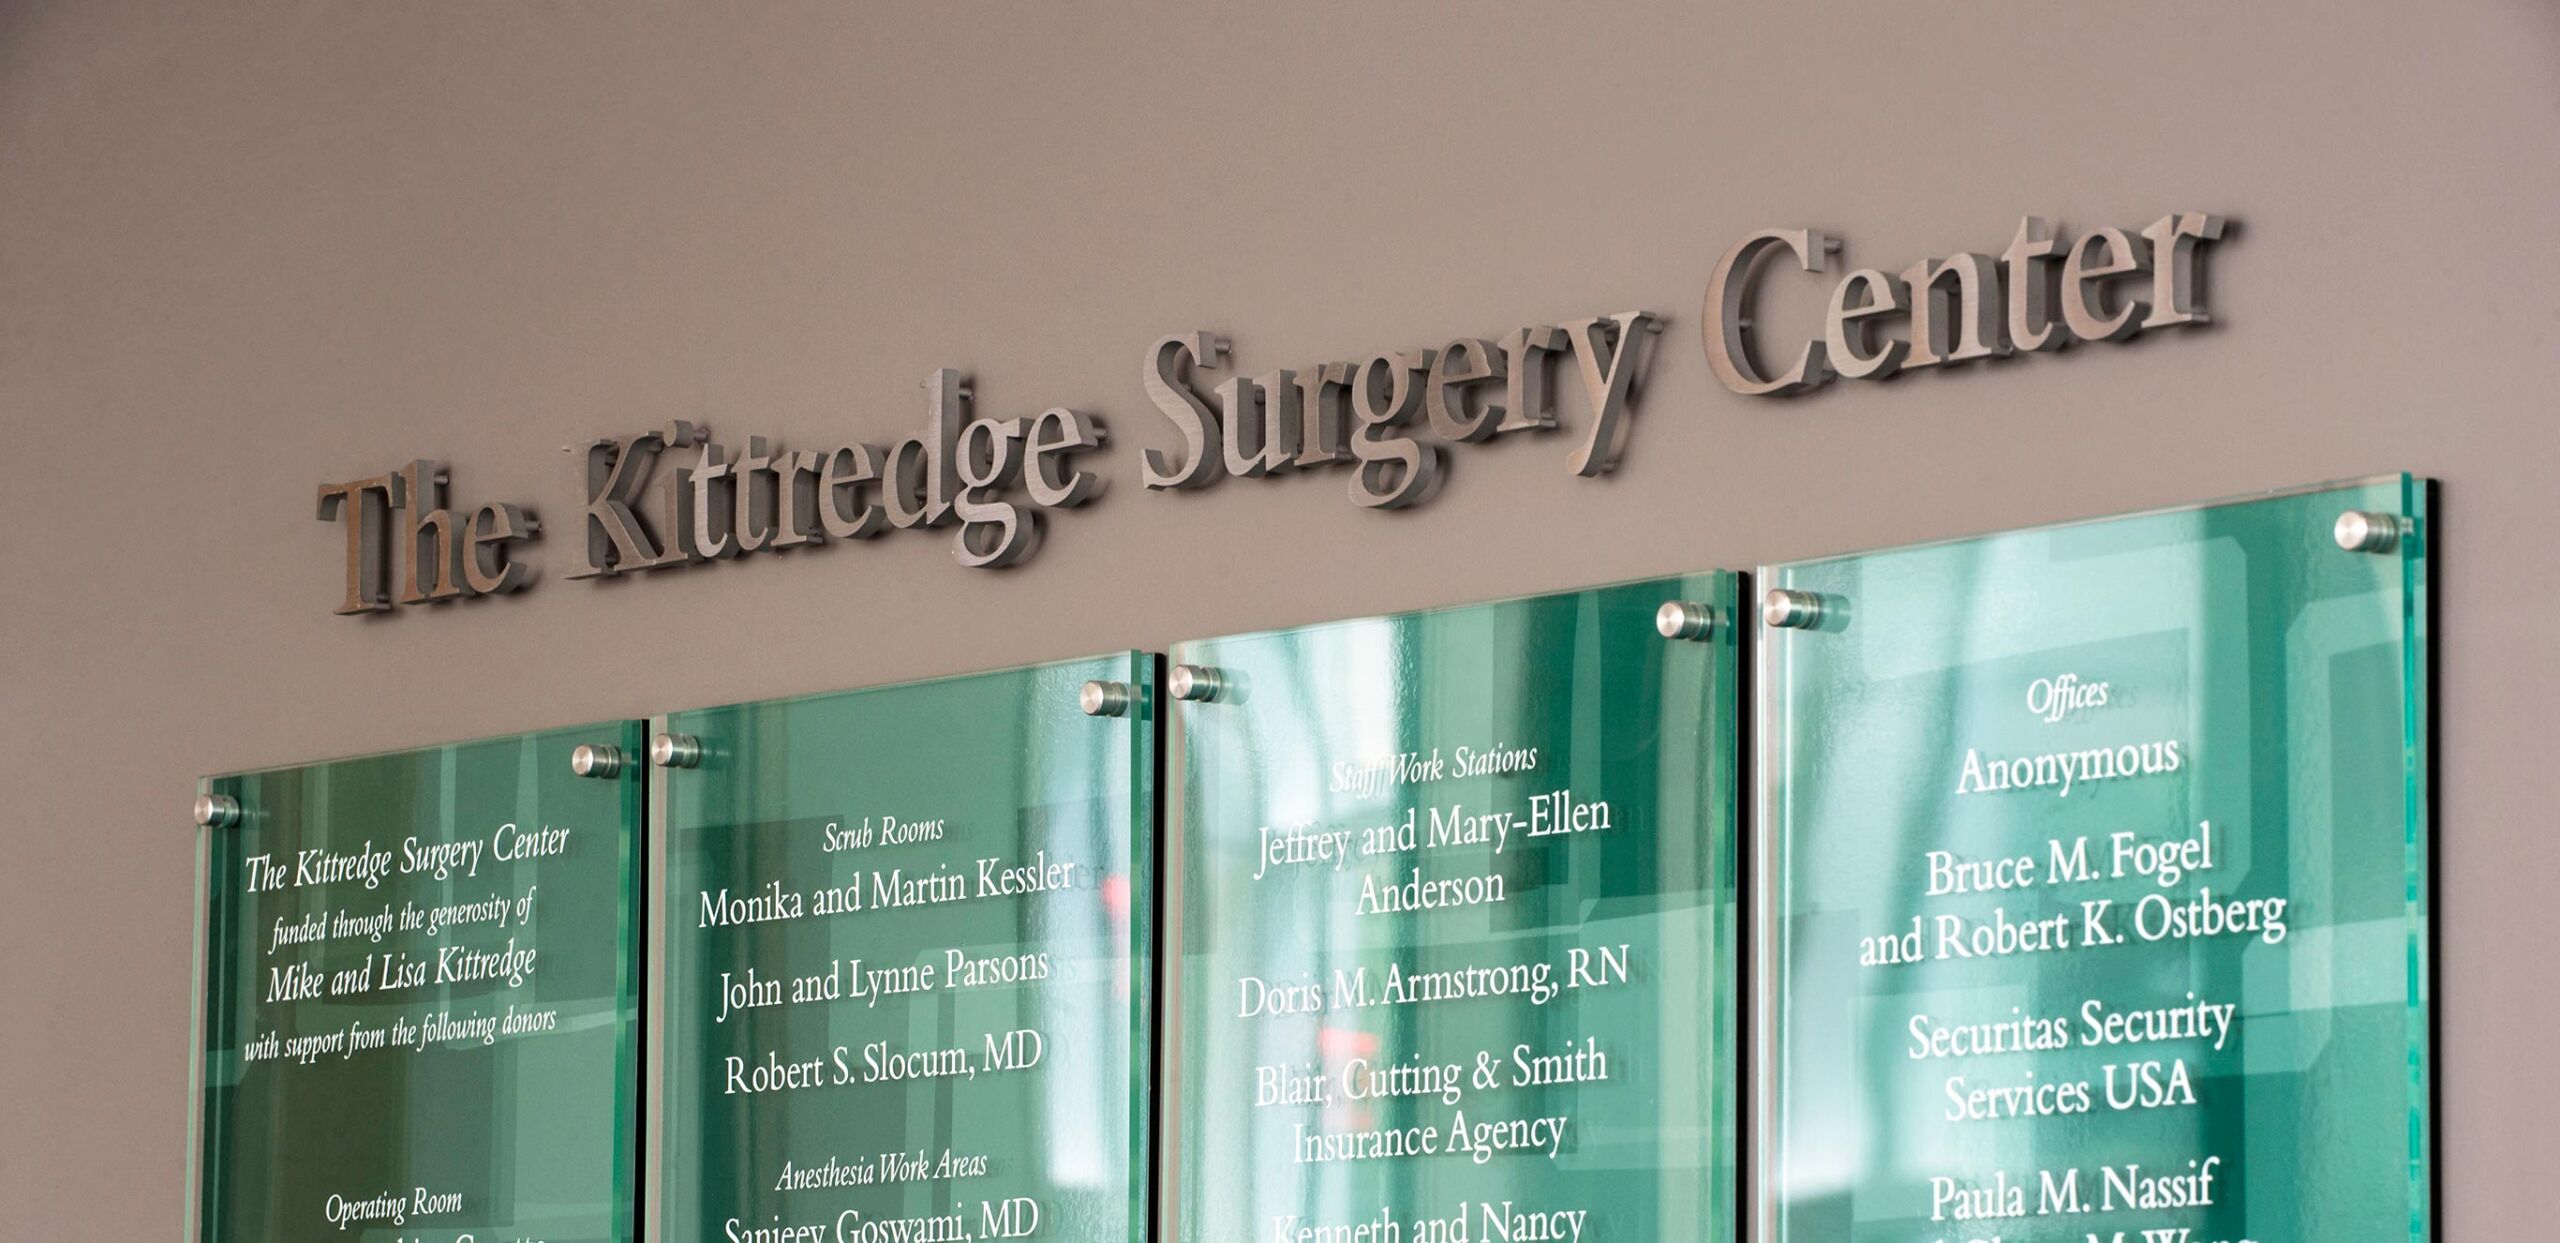 Kittredge Surgery Center - Donors